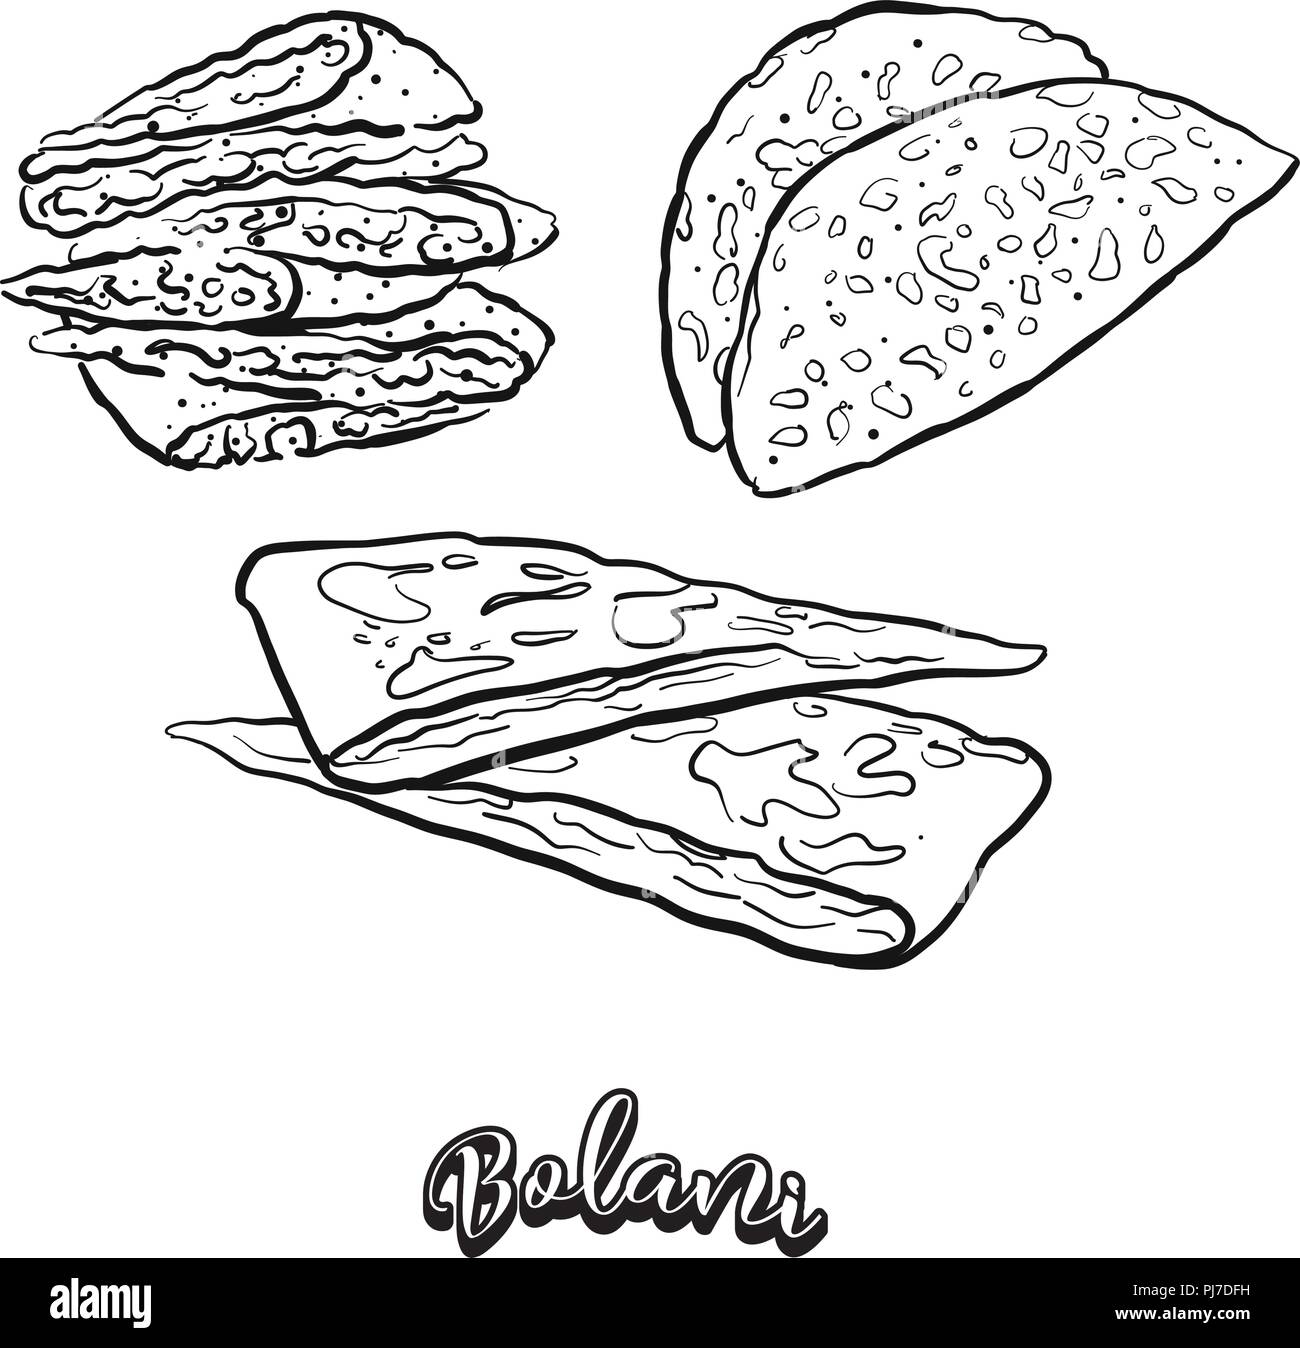 Hand drawn sketch of Bolani bread. Vector drawing of Flatbread food, usually known in Afghanistan. Bread illustration series. Stock Vector